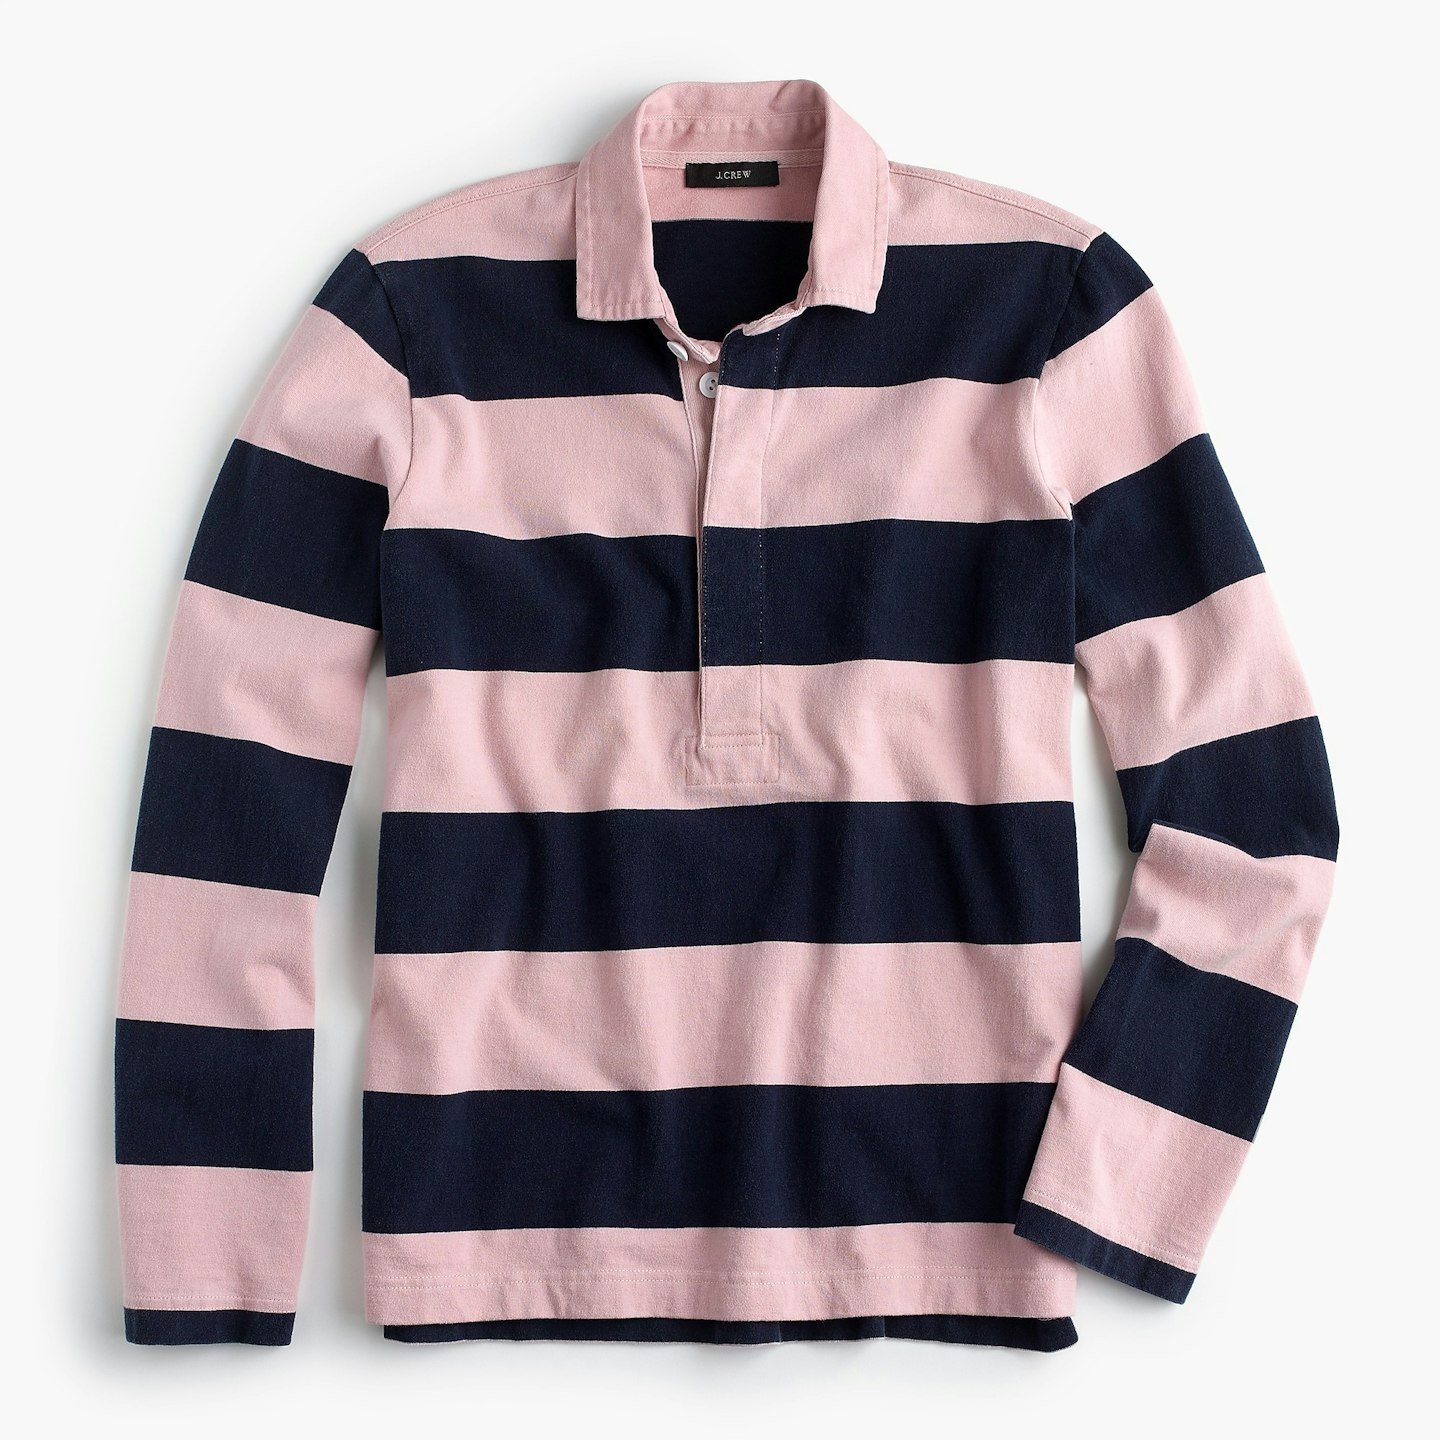 what to wear to work j crew rugby shirt